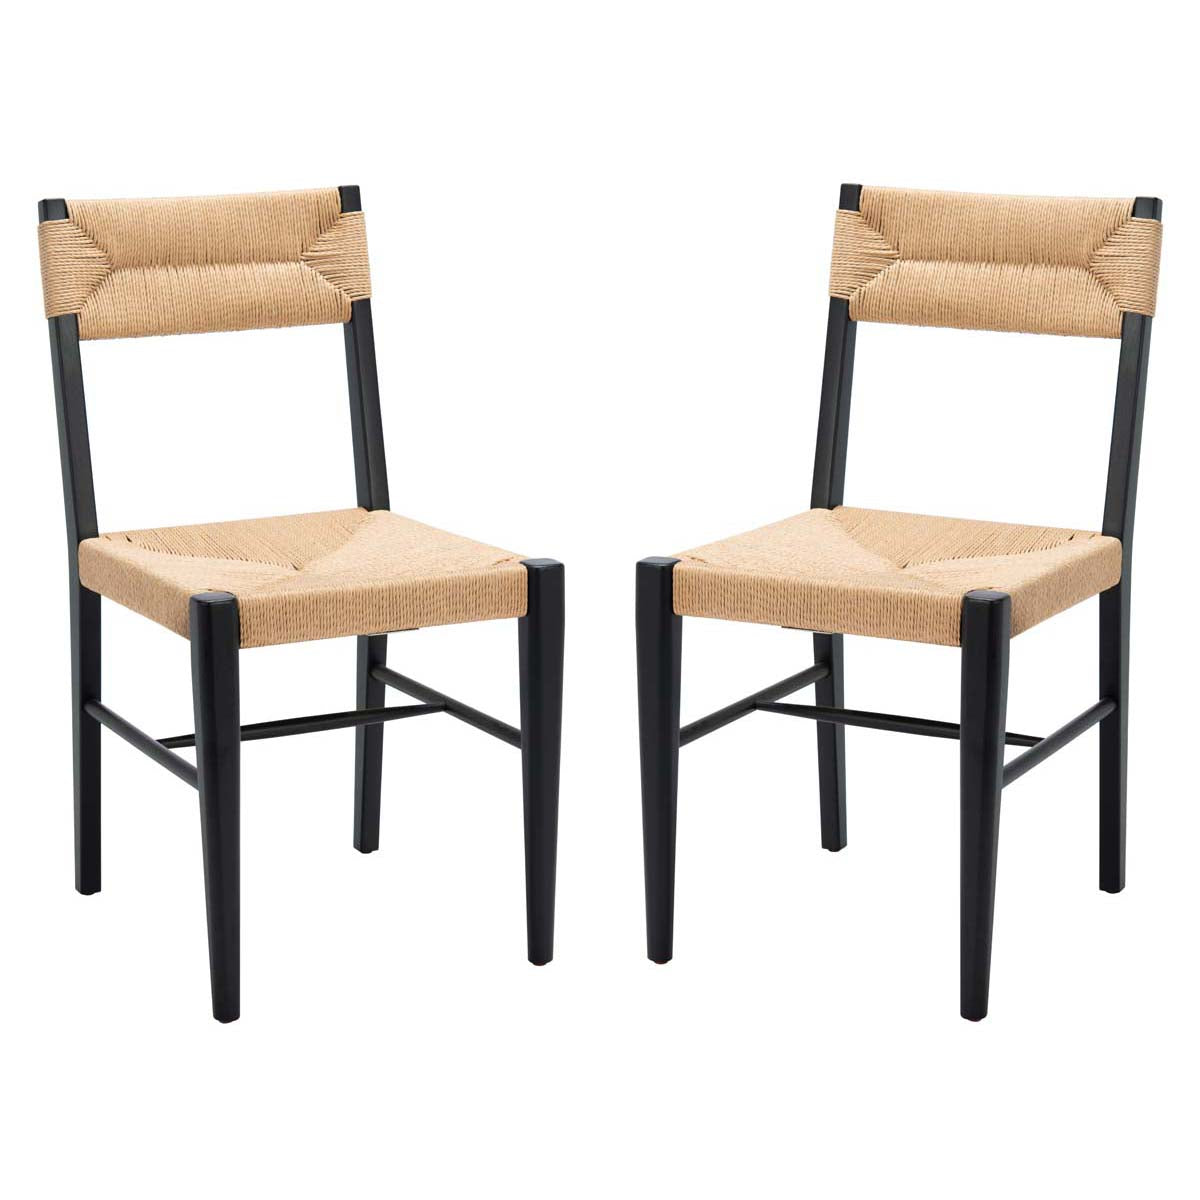 Safavieh Couture Cody Rattan Dining Chair